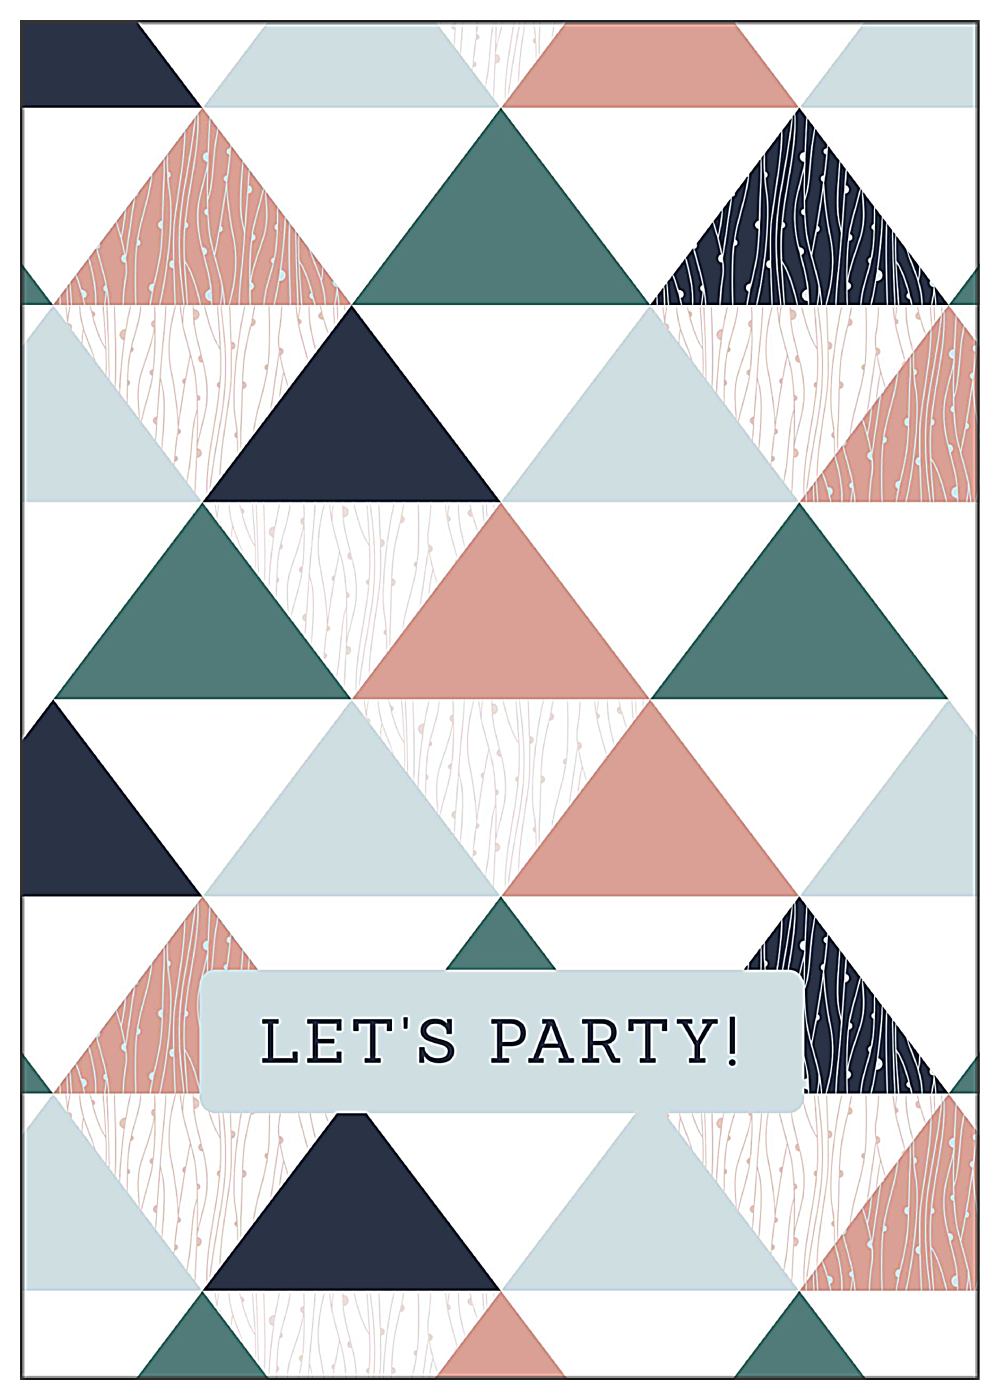 Triangle Party front - Greeting Cards Maker